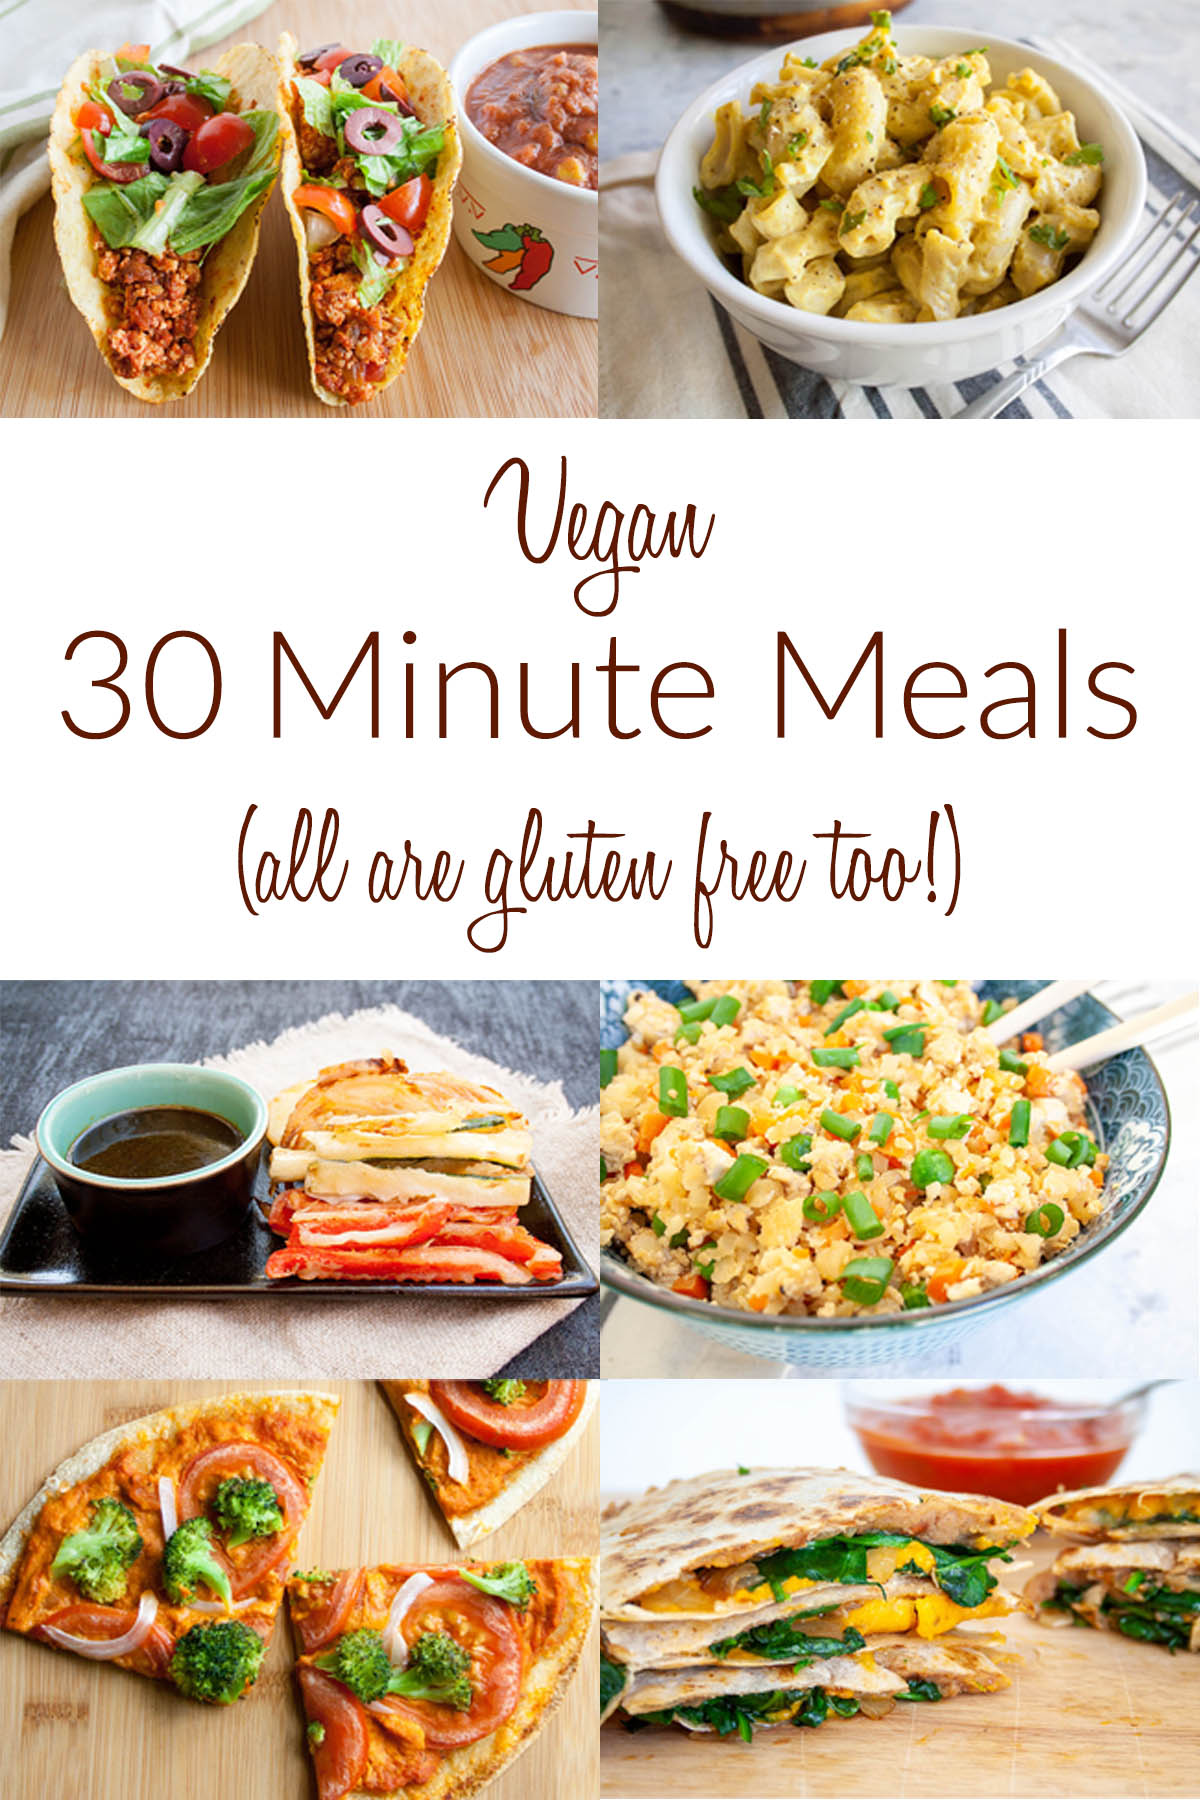 Collage photo with text that reads, "Vegan 30 Minute Meals, all are gluten free"